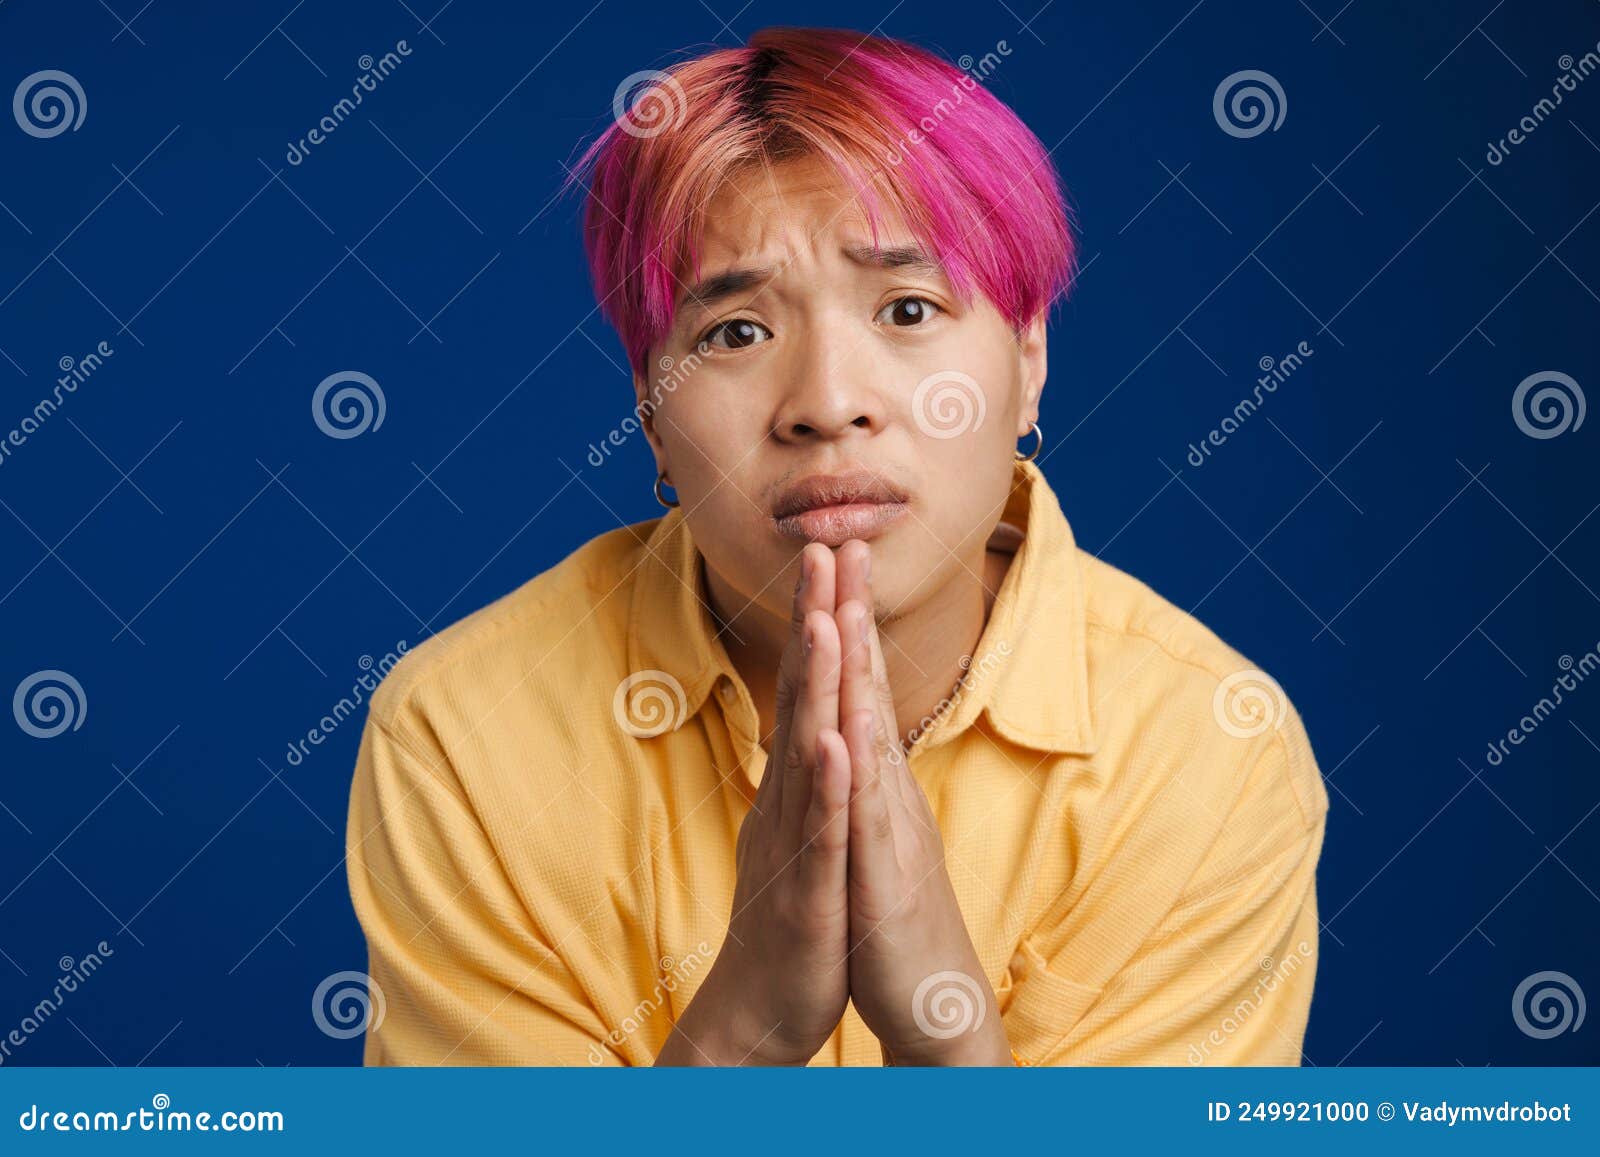 asian boy with pink hair frowning while payer gesture